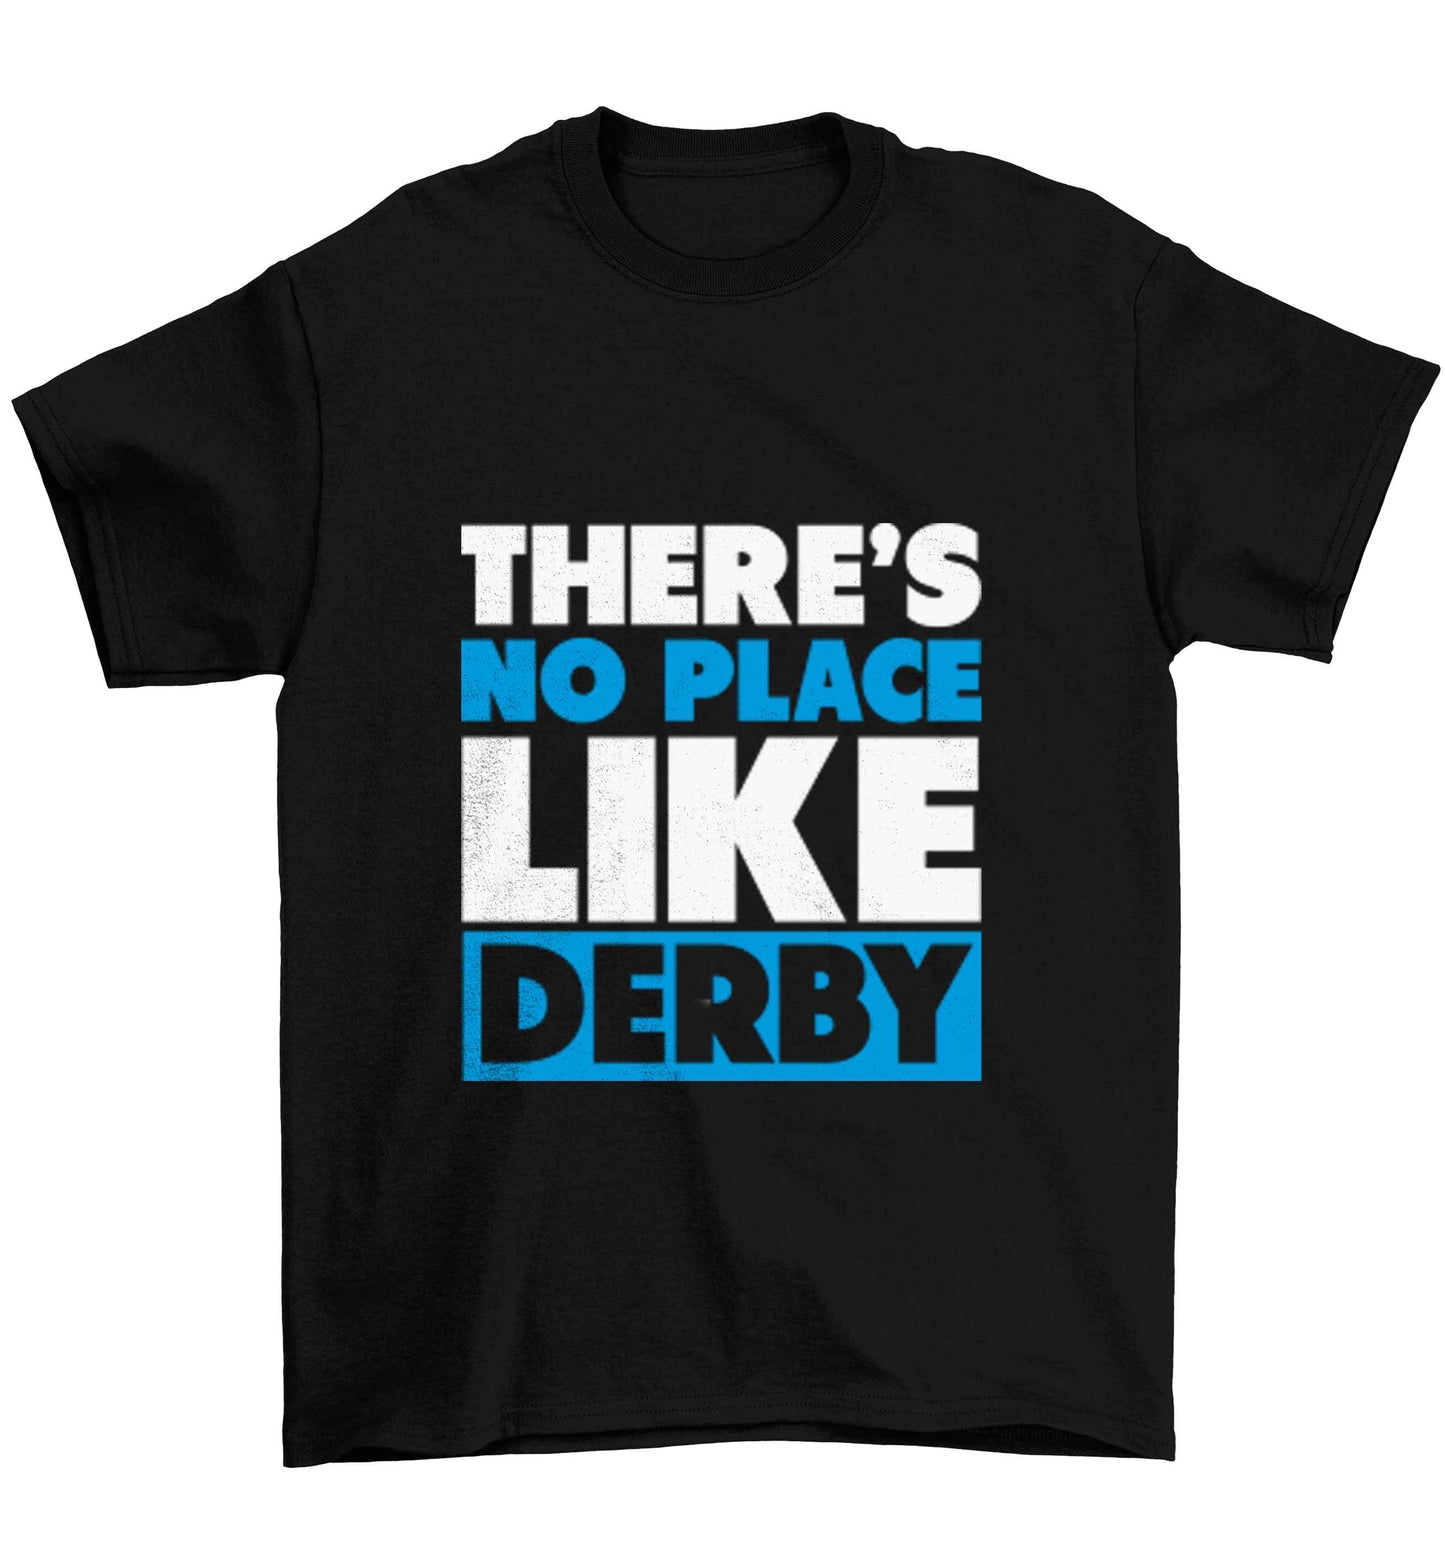 There's no place like Derby Children's black Tshirt 12-13 Years